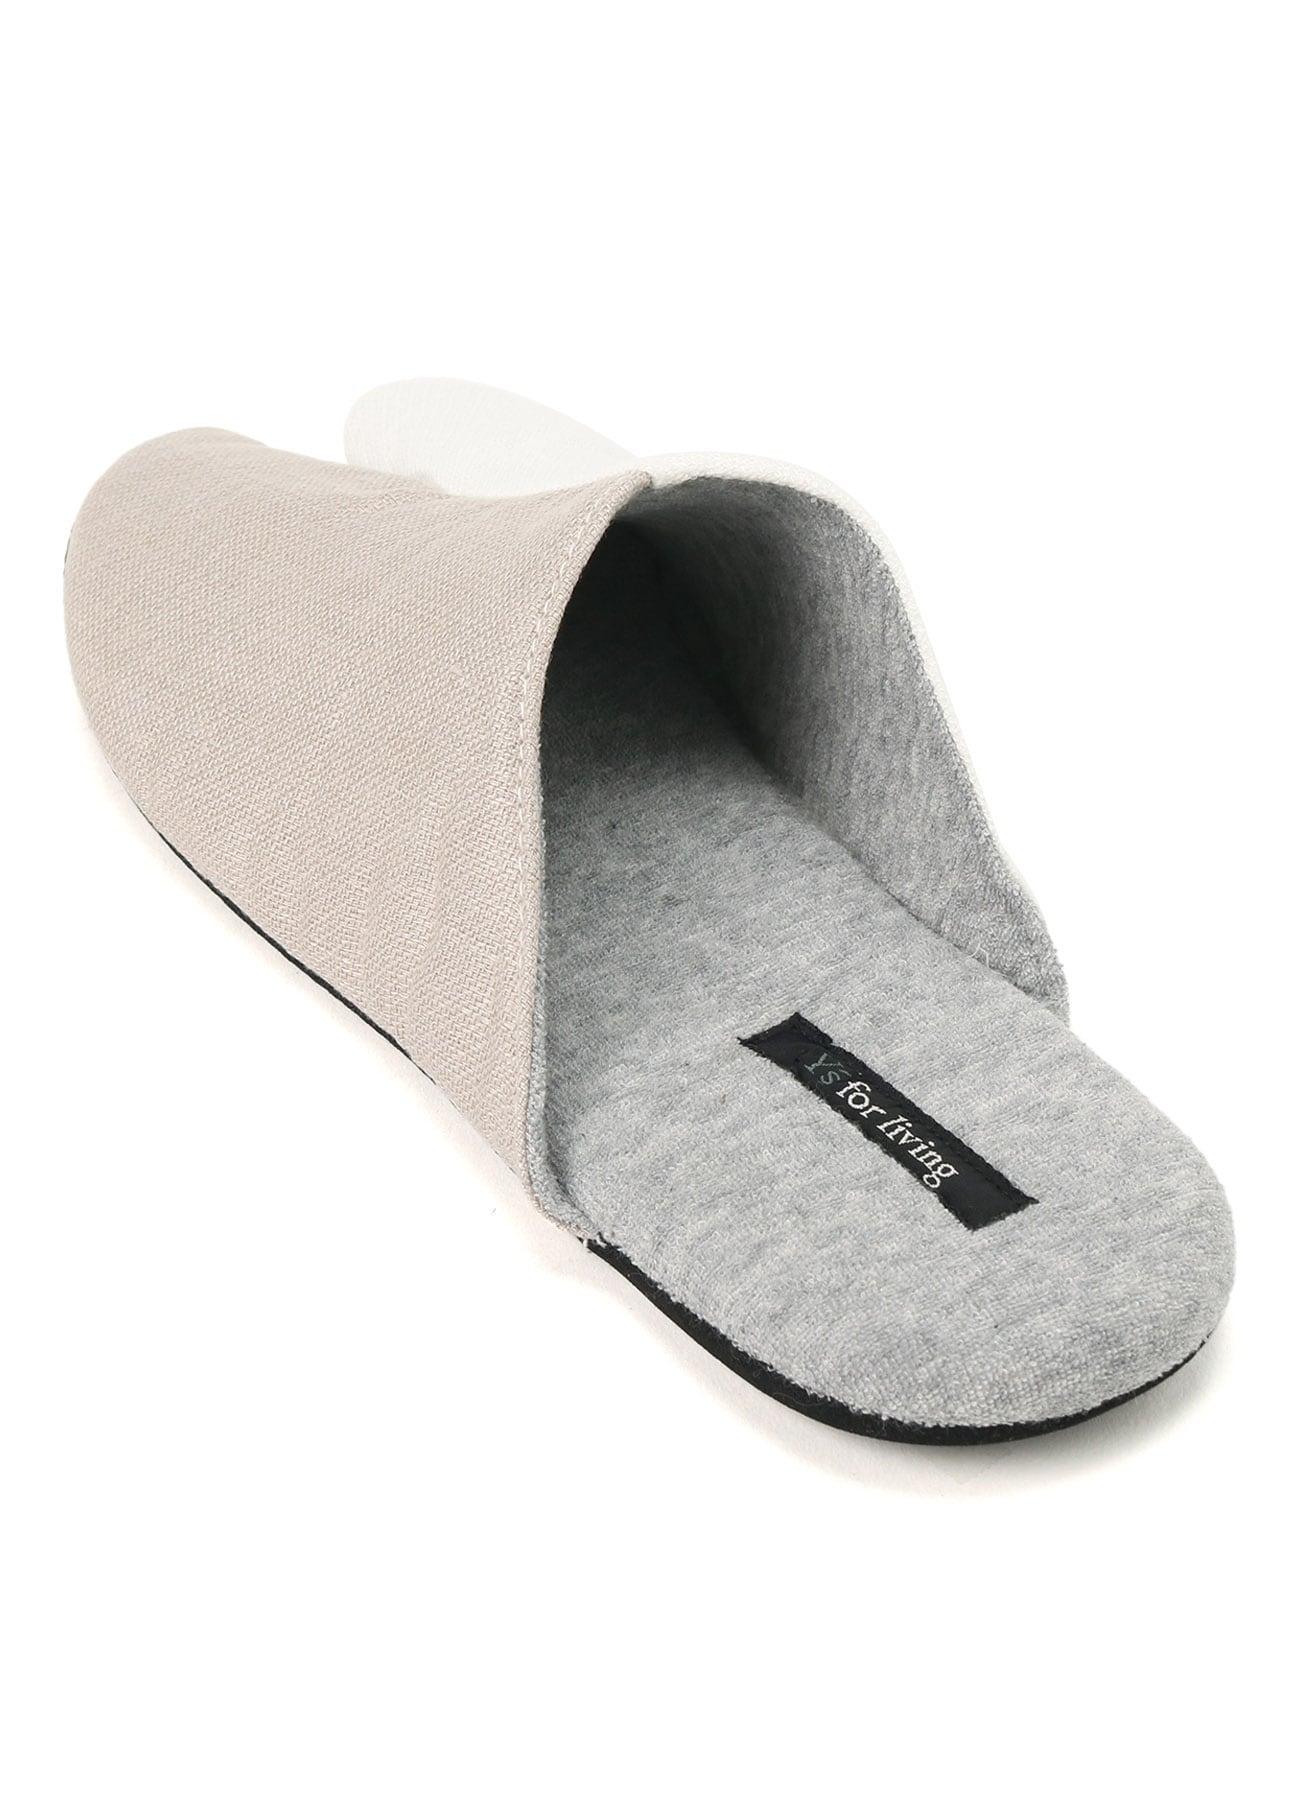 FRENCH LINEN DOBBY CLOTH TABI SLIPPERS (M)